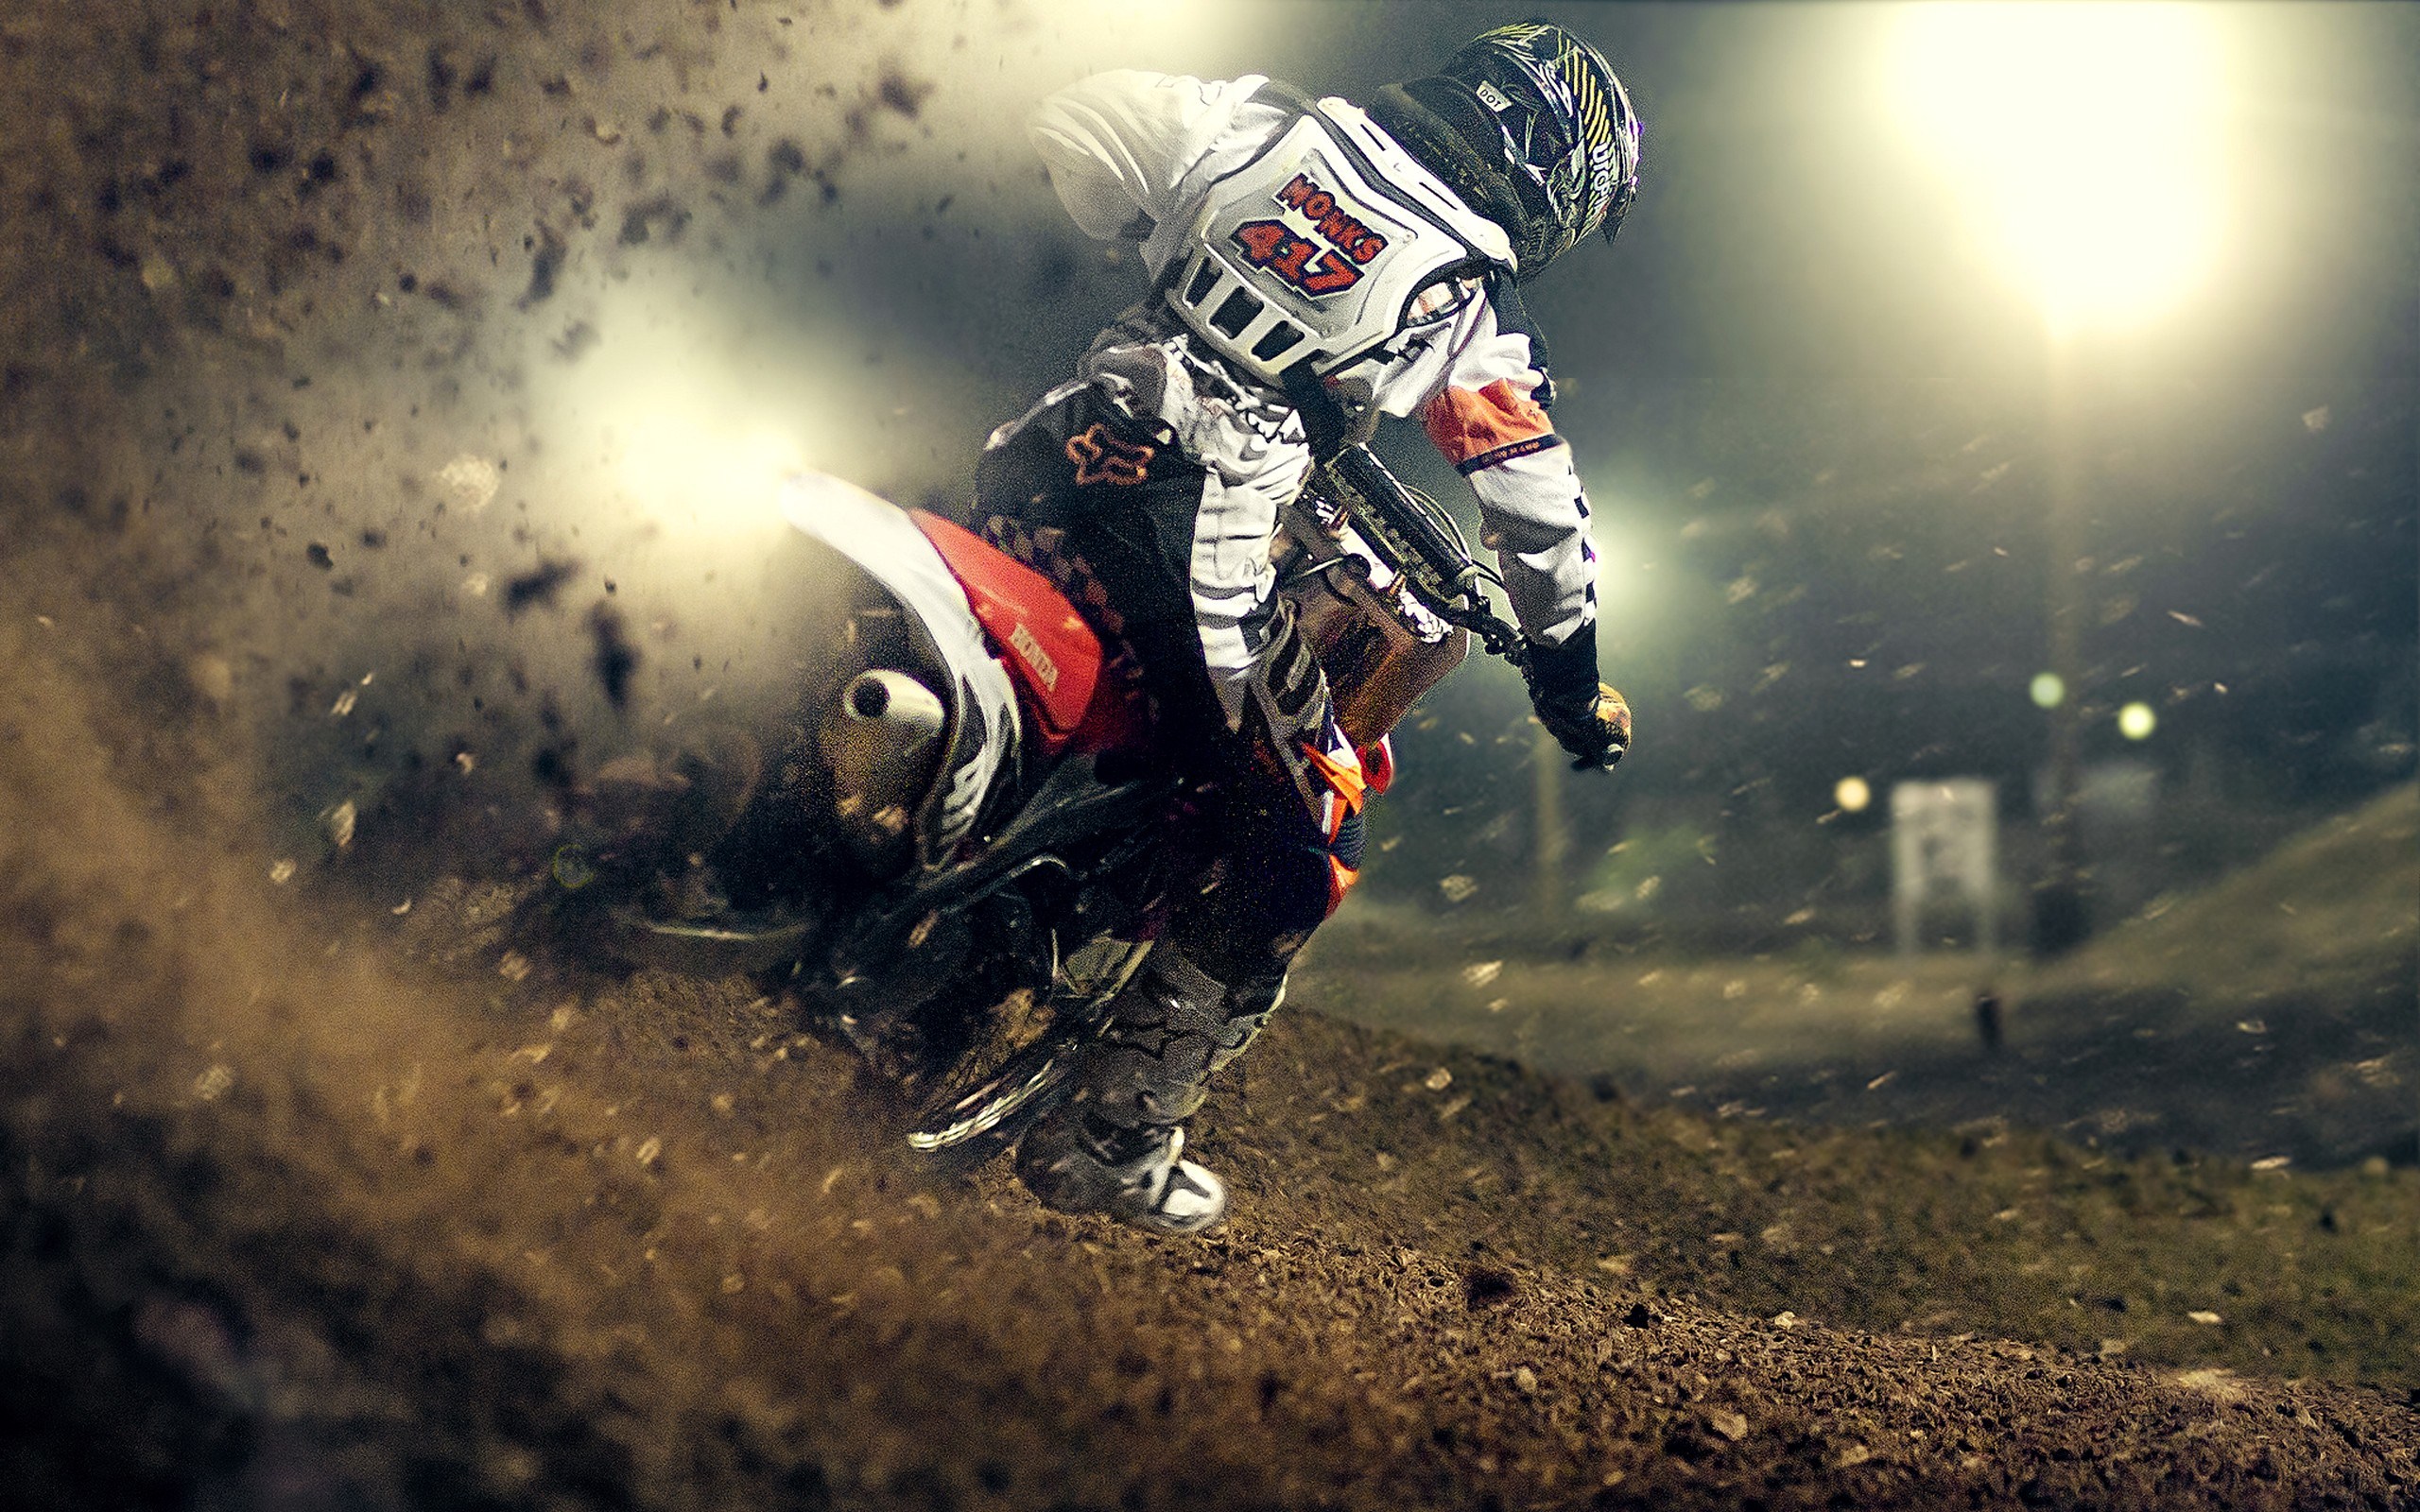 moto wallpapers,motocross,freestyle motocross,motorcycling,motorcycle racing,extreme sport